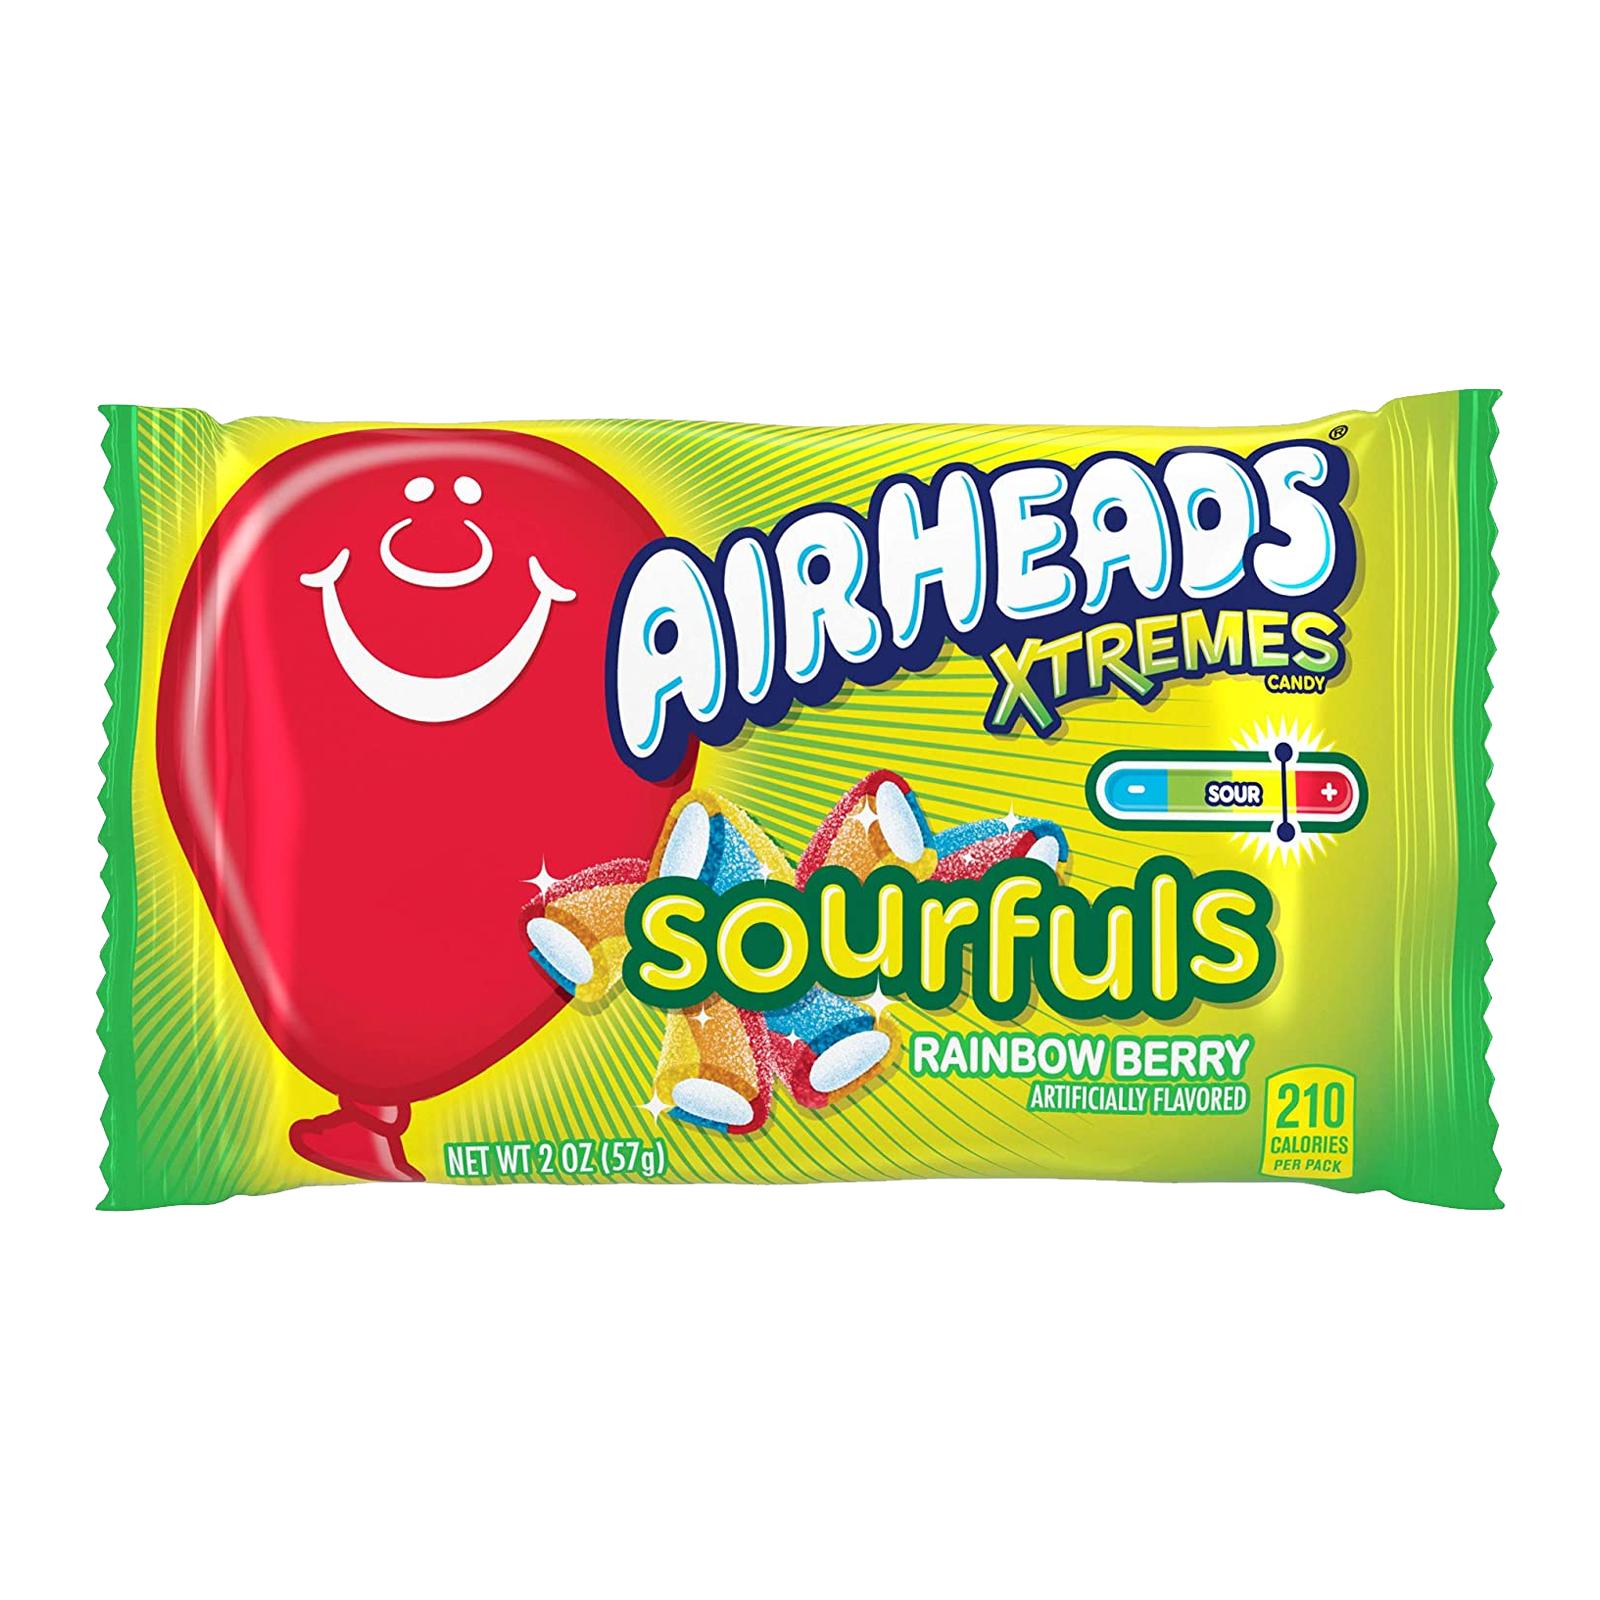 Airheads Xtremes Sourfuls Rainbow Berry Candy 57g sold by American Grocer in the UK